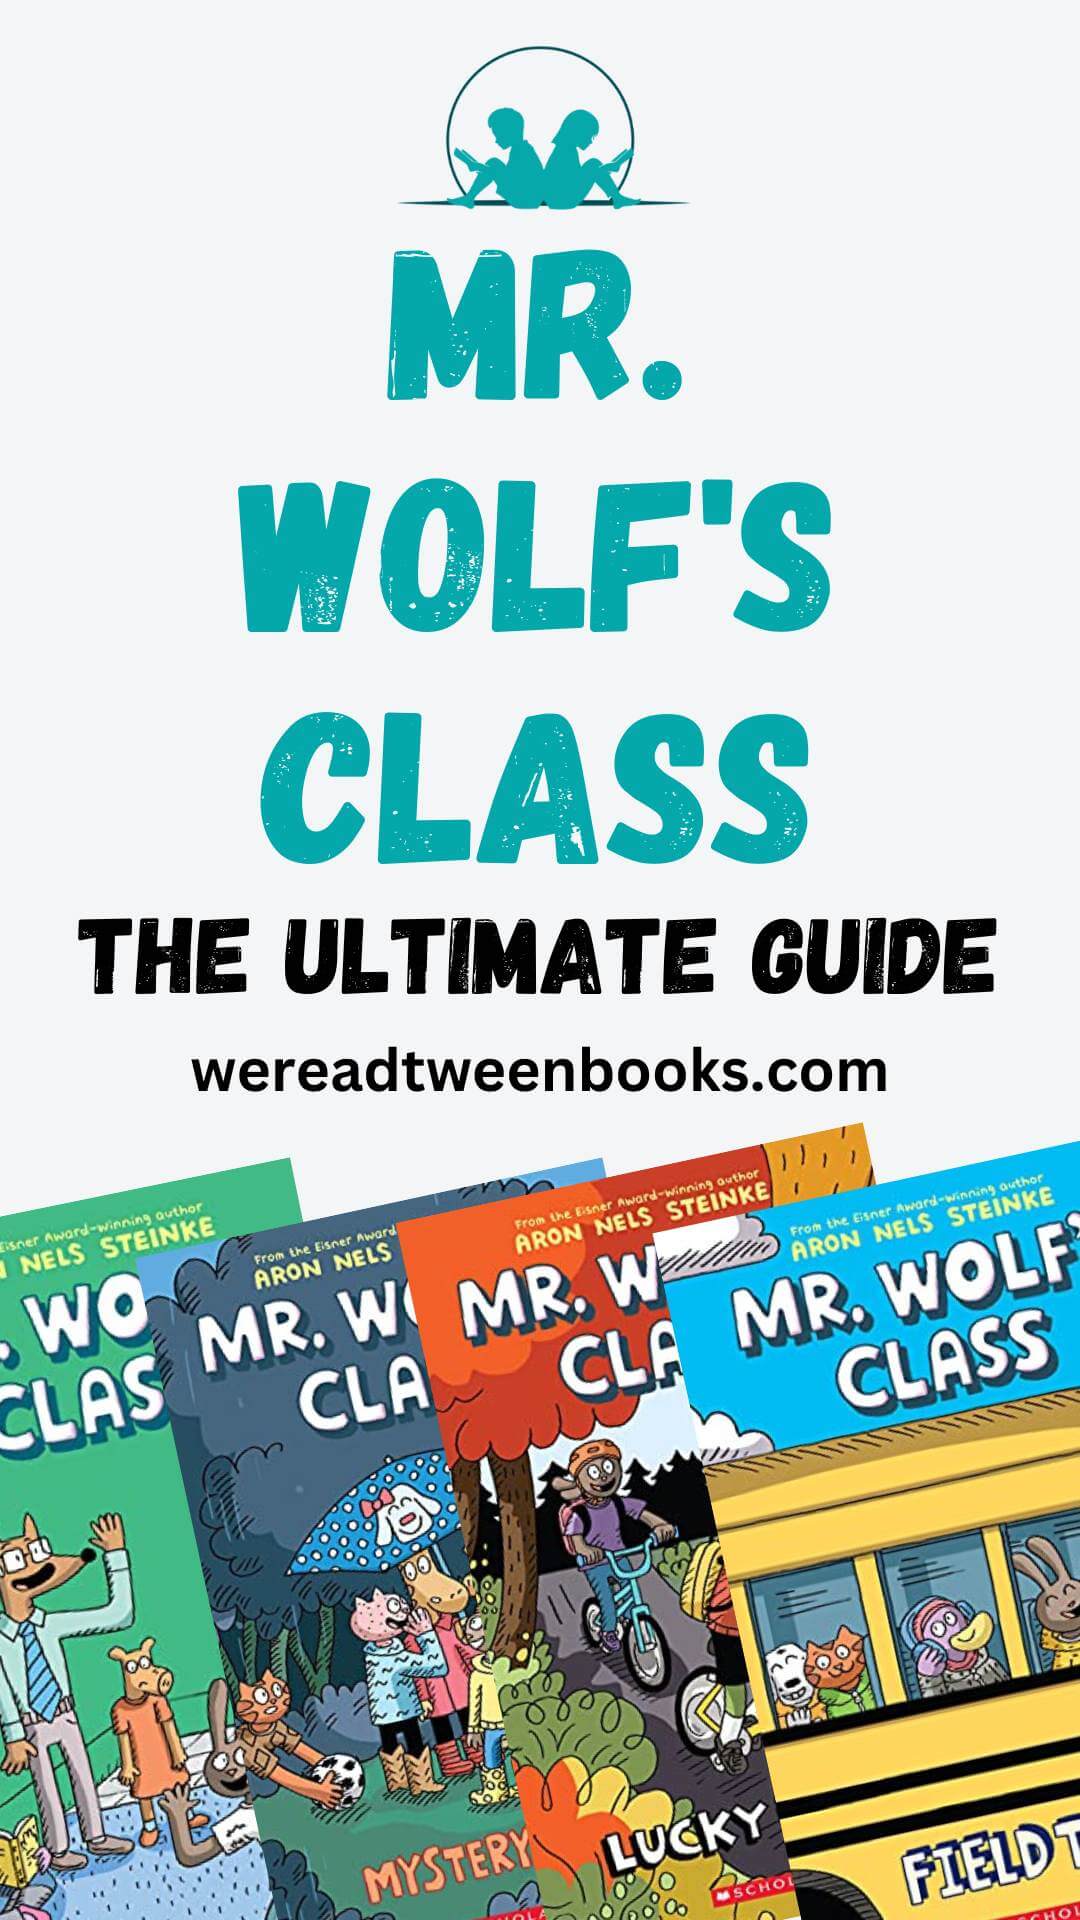 Discover the ultimate guide to the Mr. Wolf's Class series of graphic novels for middle grade readers on the book blog, We Read Tween Books.